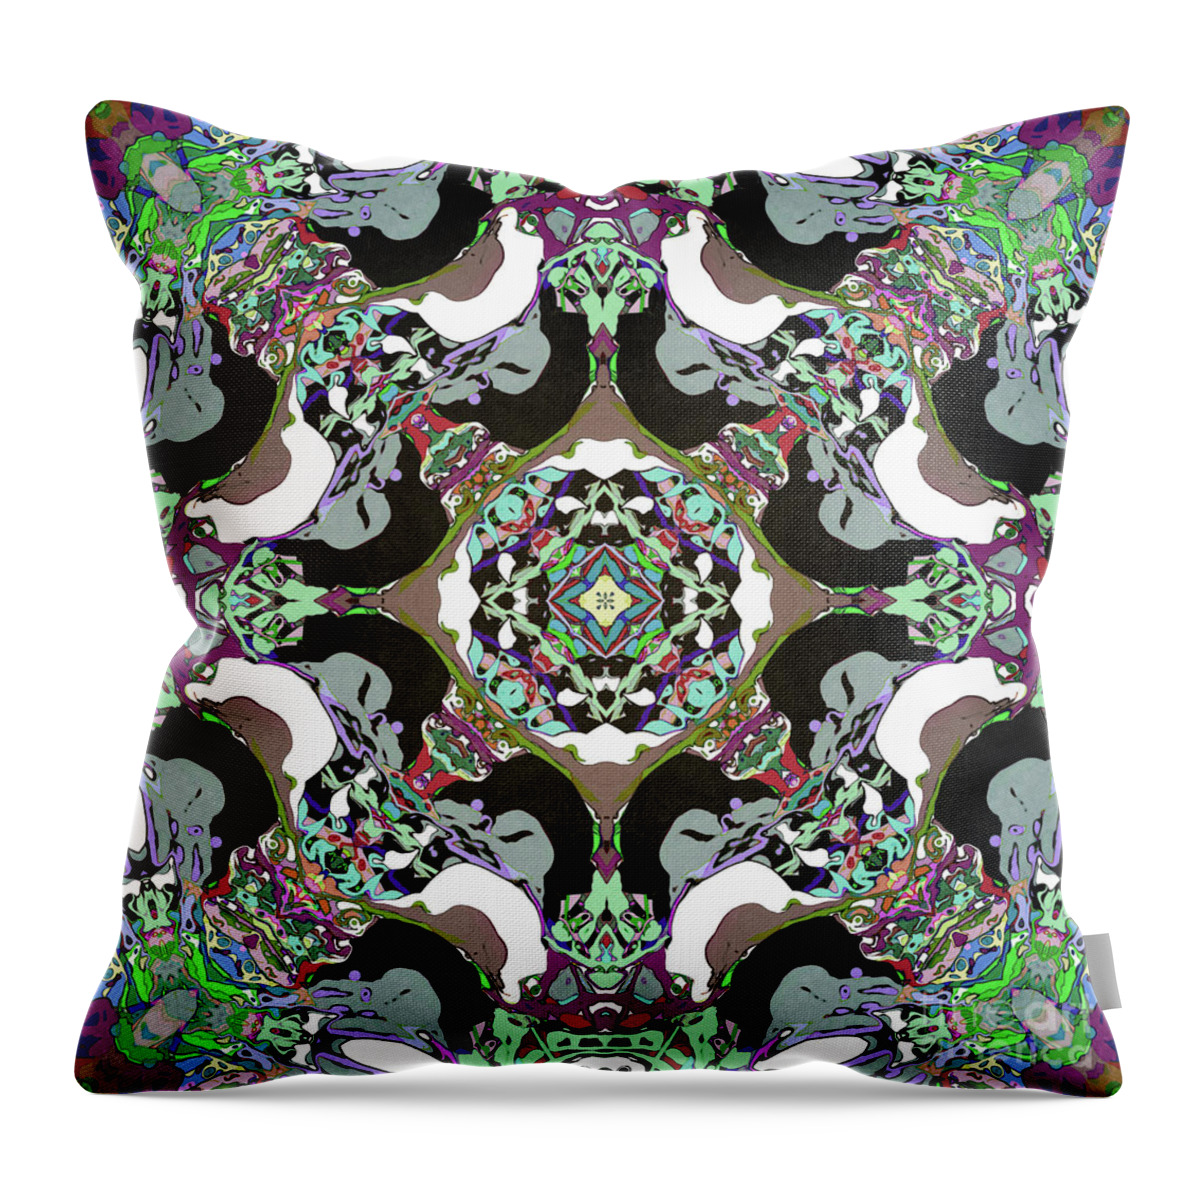 Symmetry Throw Pillow featuring the digital art Abstract Mandala by Phil Perkins